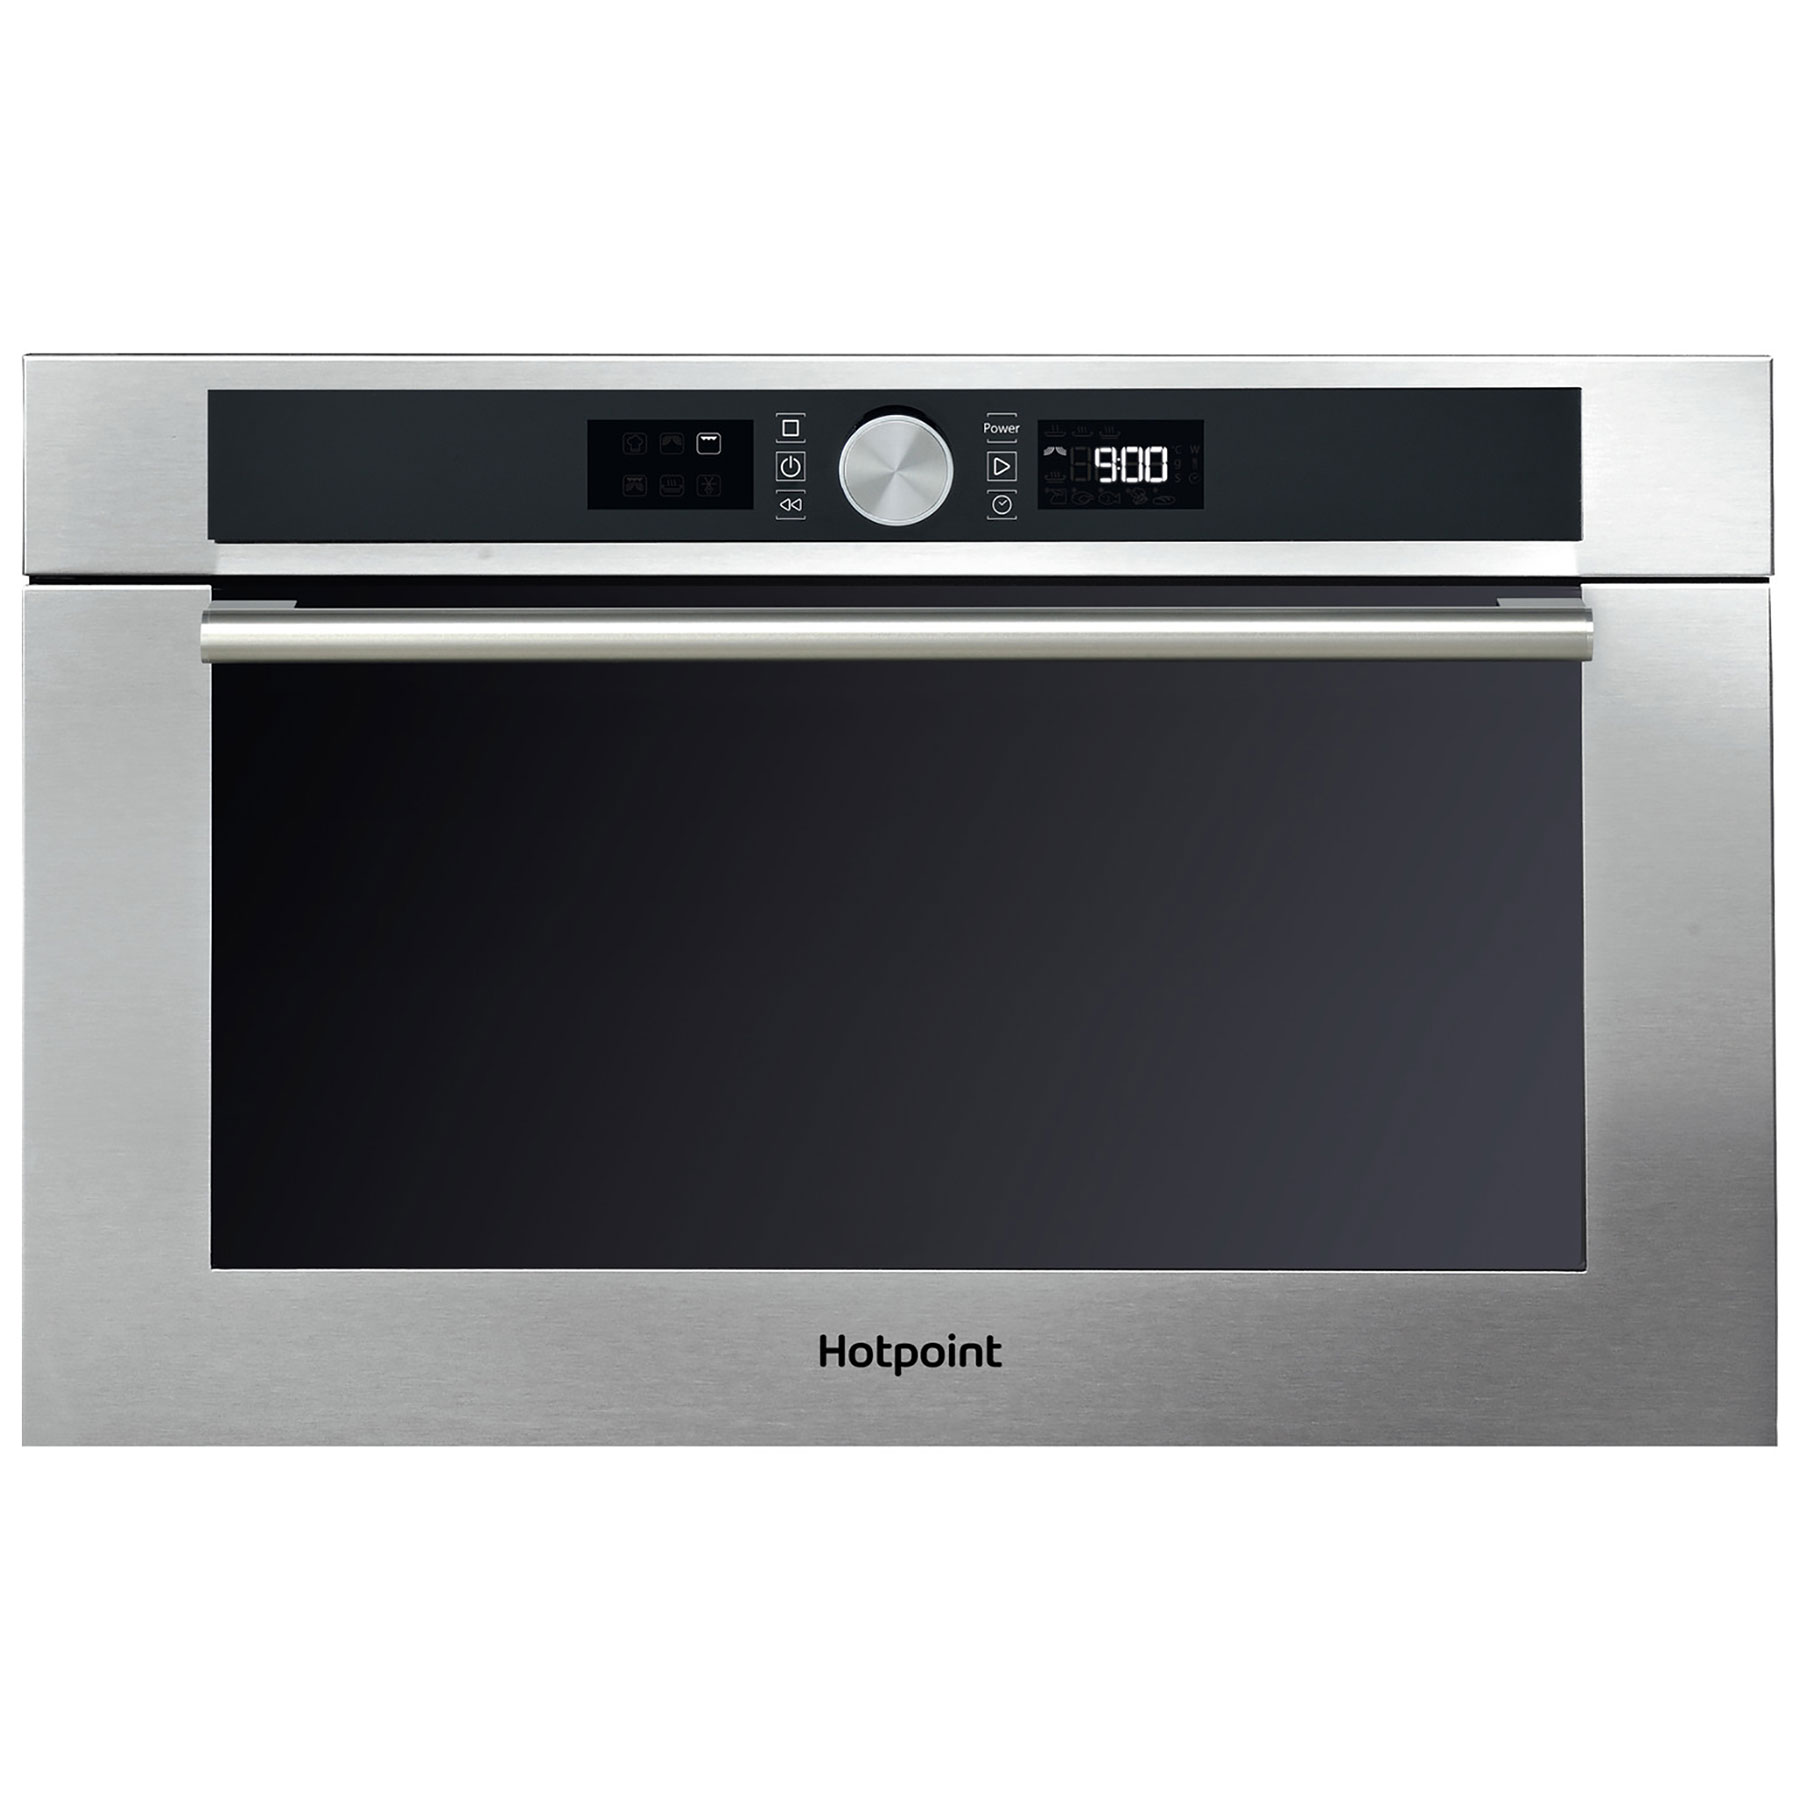 Image of Hotpoint MD454IXH Built In Microwave Oven Grill in St Steel 31L 1000W